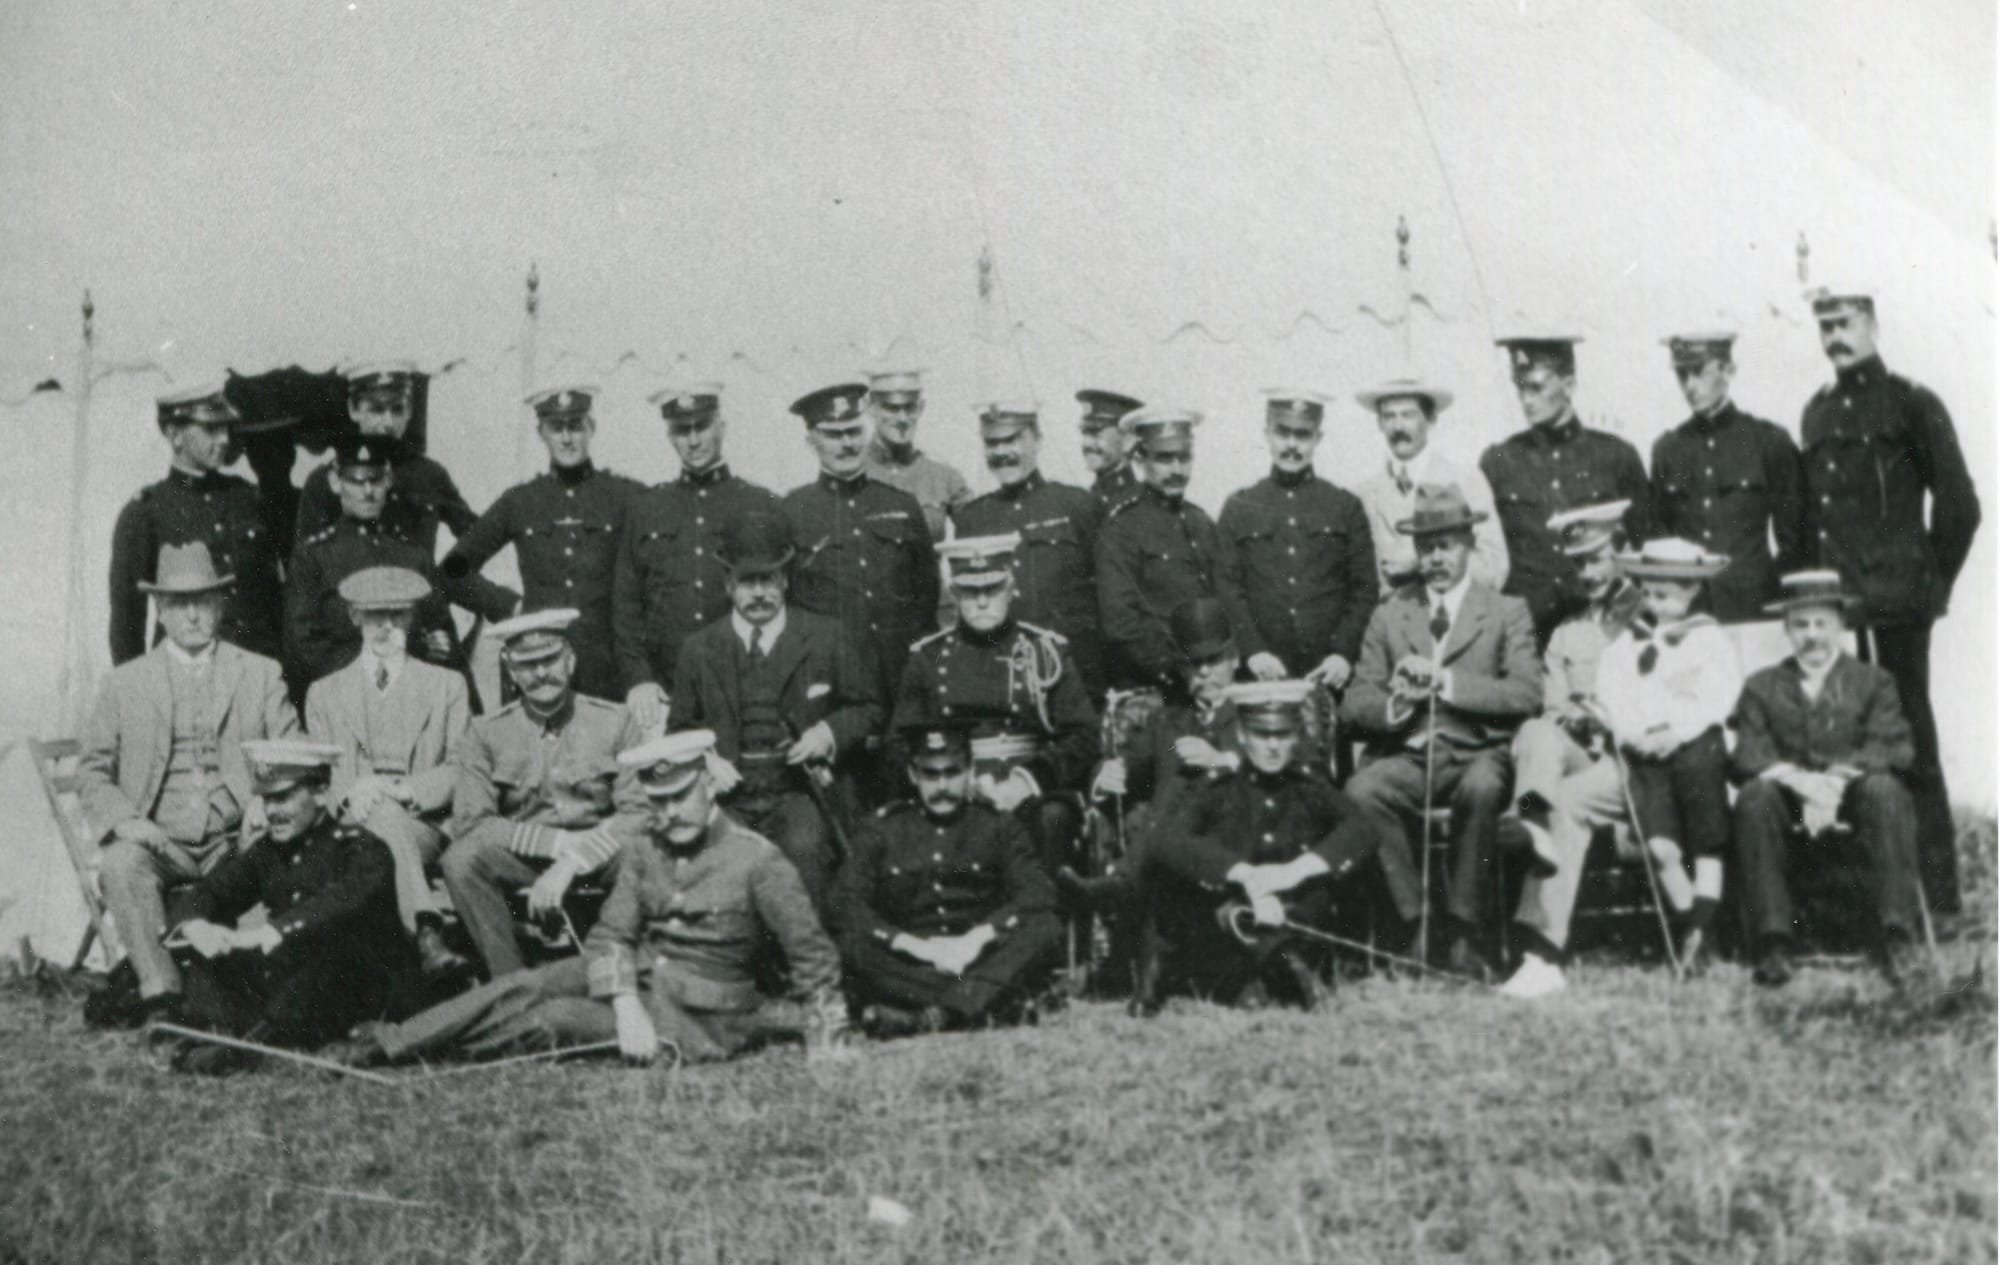 Photograph of a group of Officers of the King’s Colonials Imperial Yeomanry wearing blue Undress uniform which was only worn around camp (Courtesy David Knight).